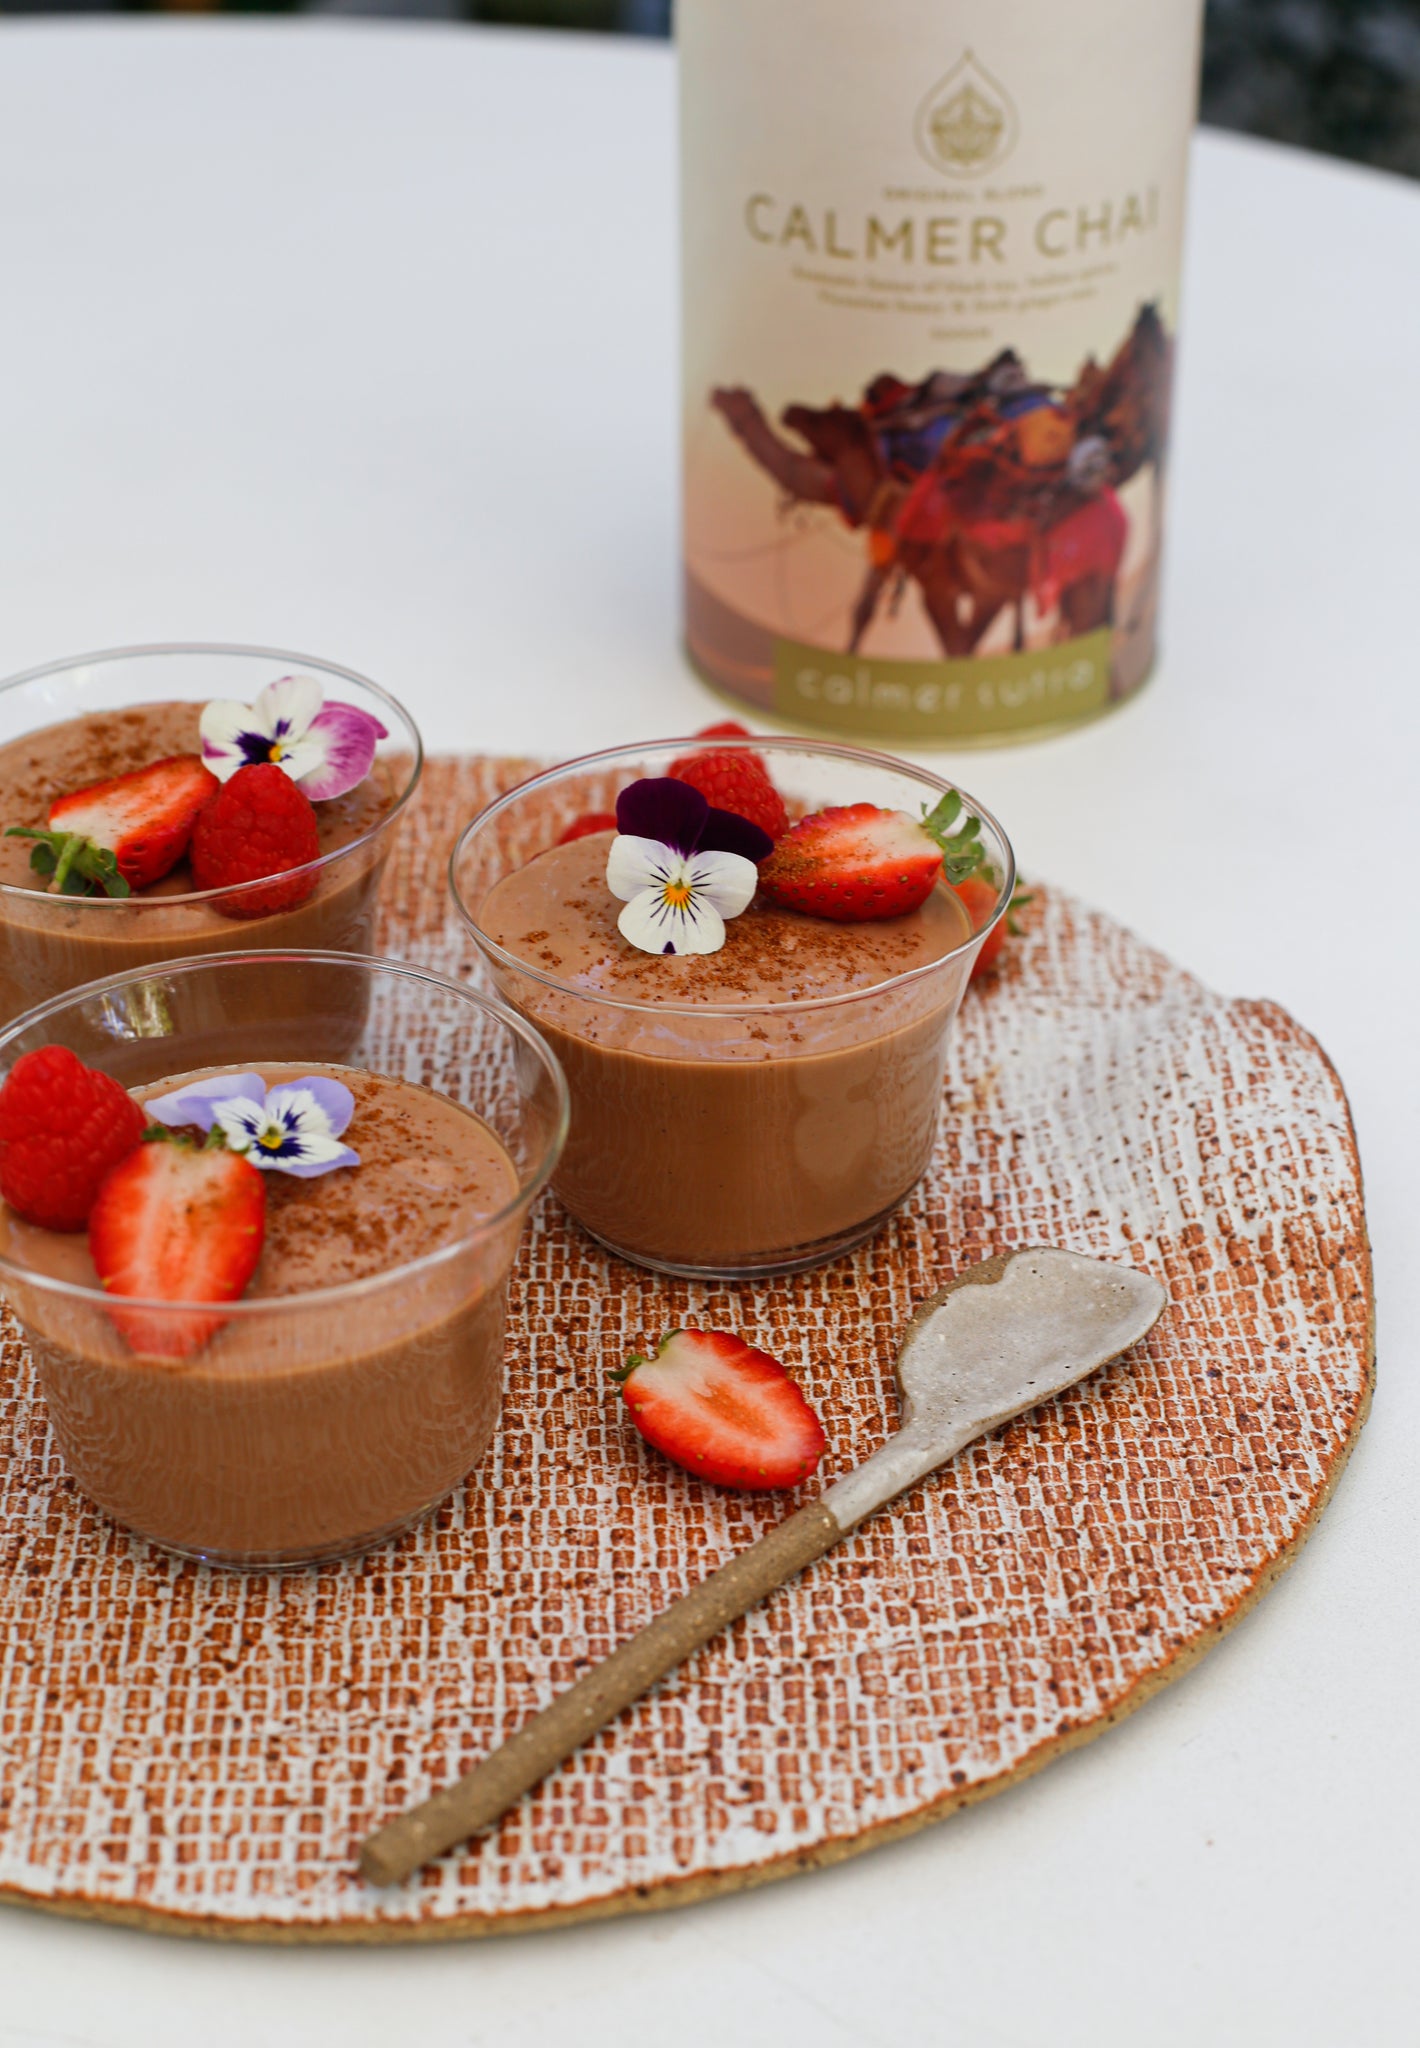 CHAI CHOCOLATE MOUSSE